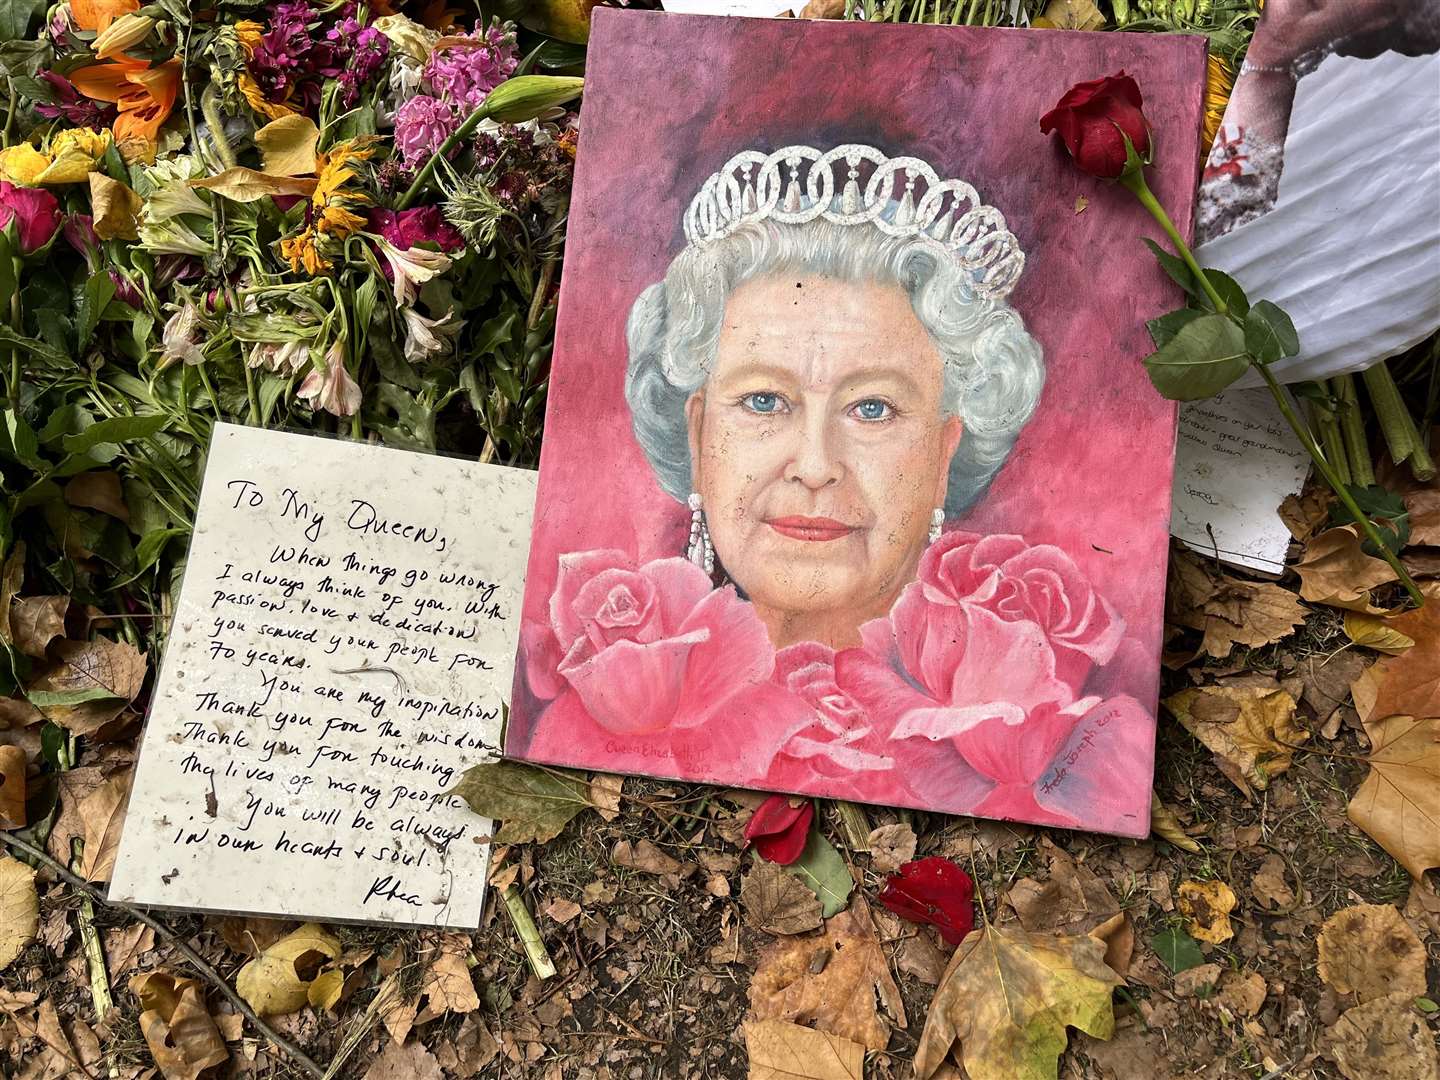 Many have left notes saying how grateful they are to have had an 'inspirational' monarch. Picture: Chantal Weller